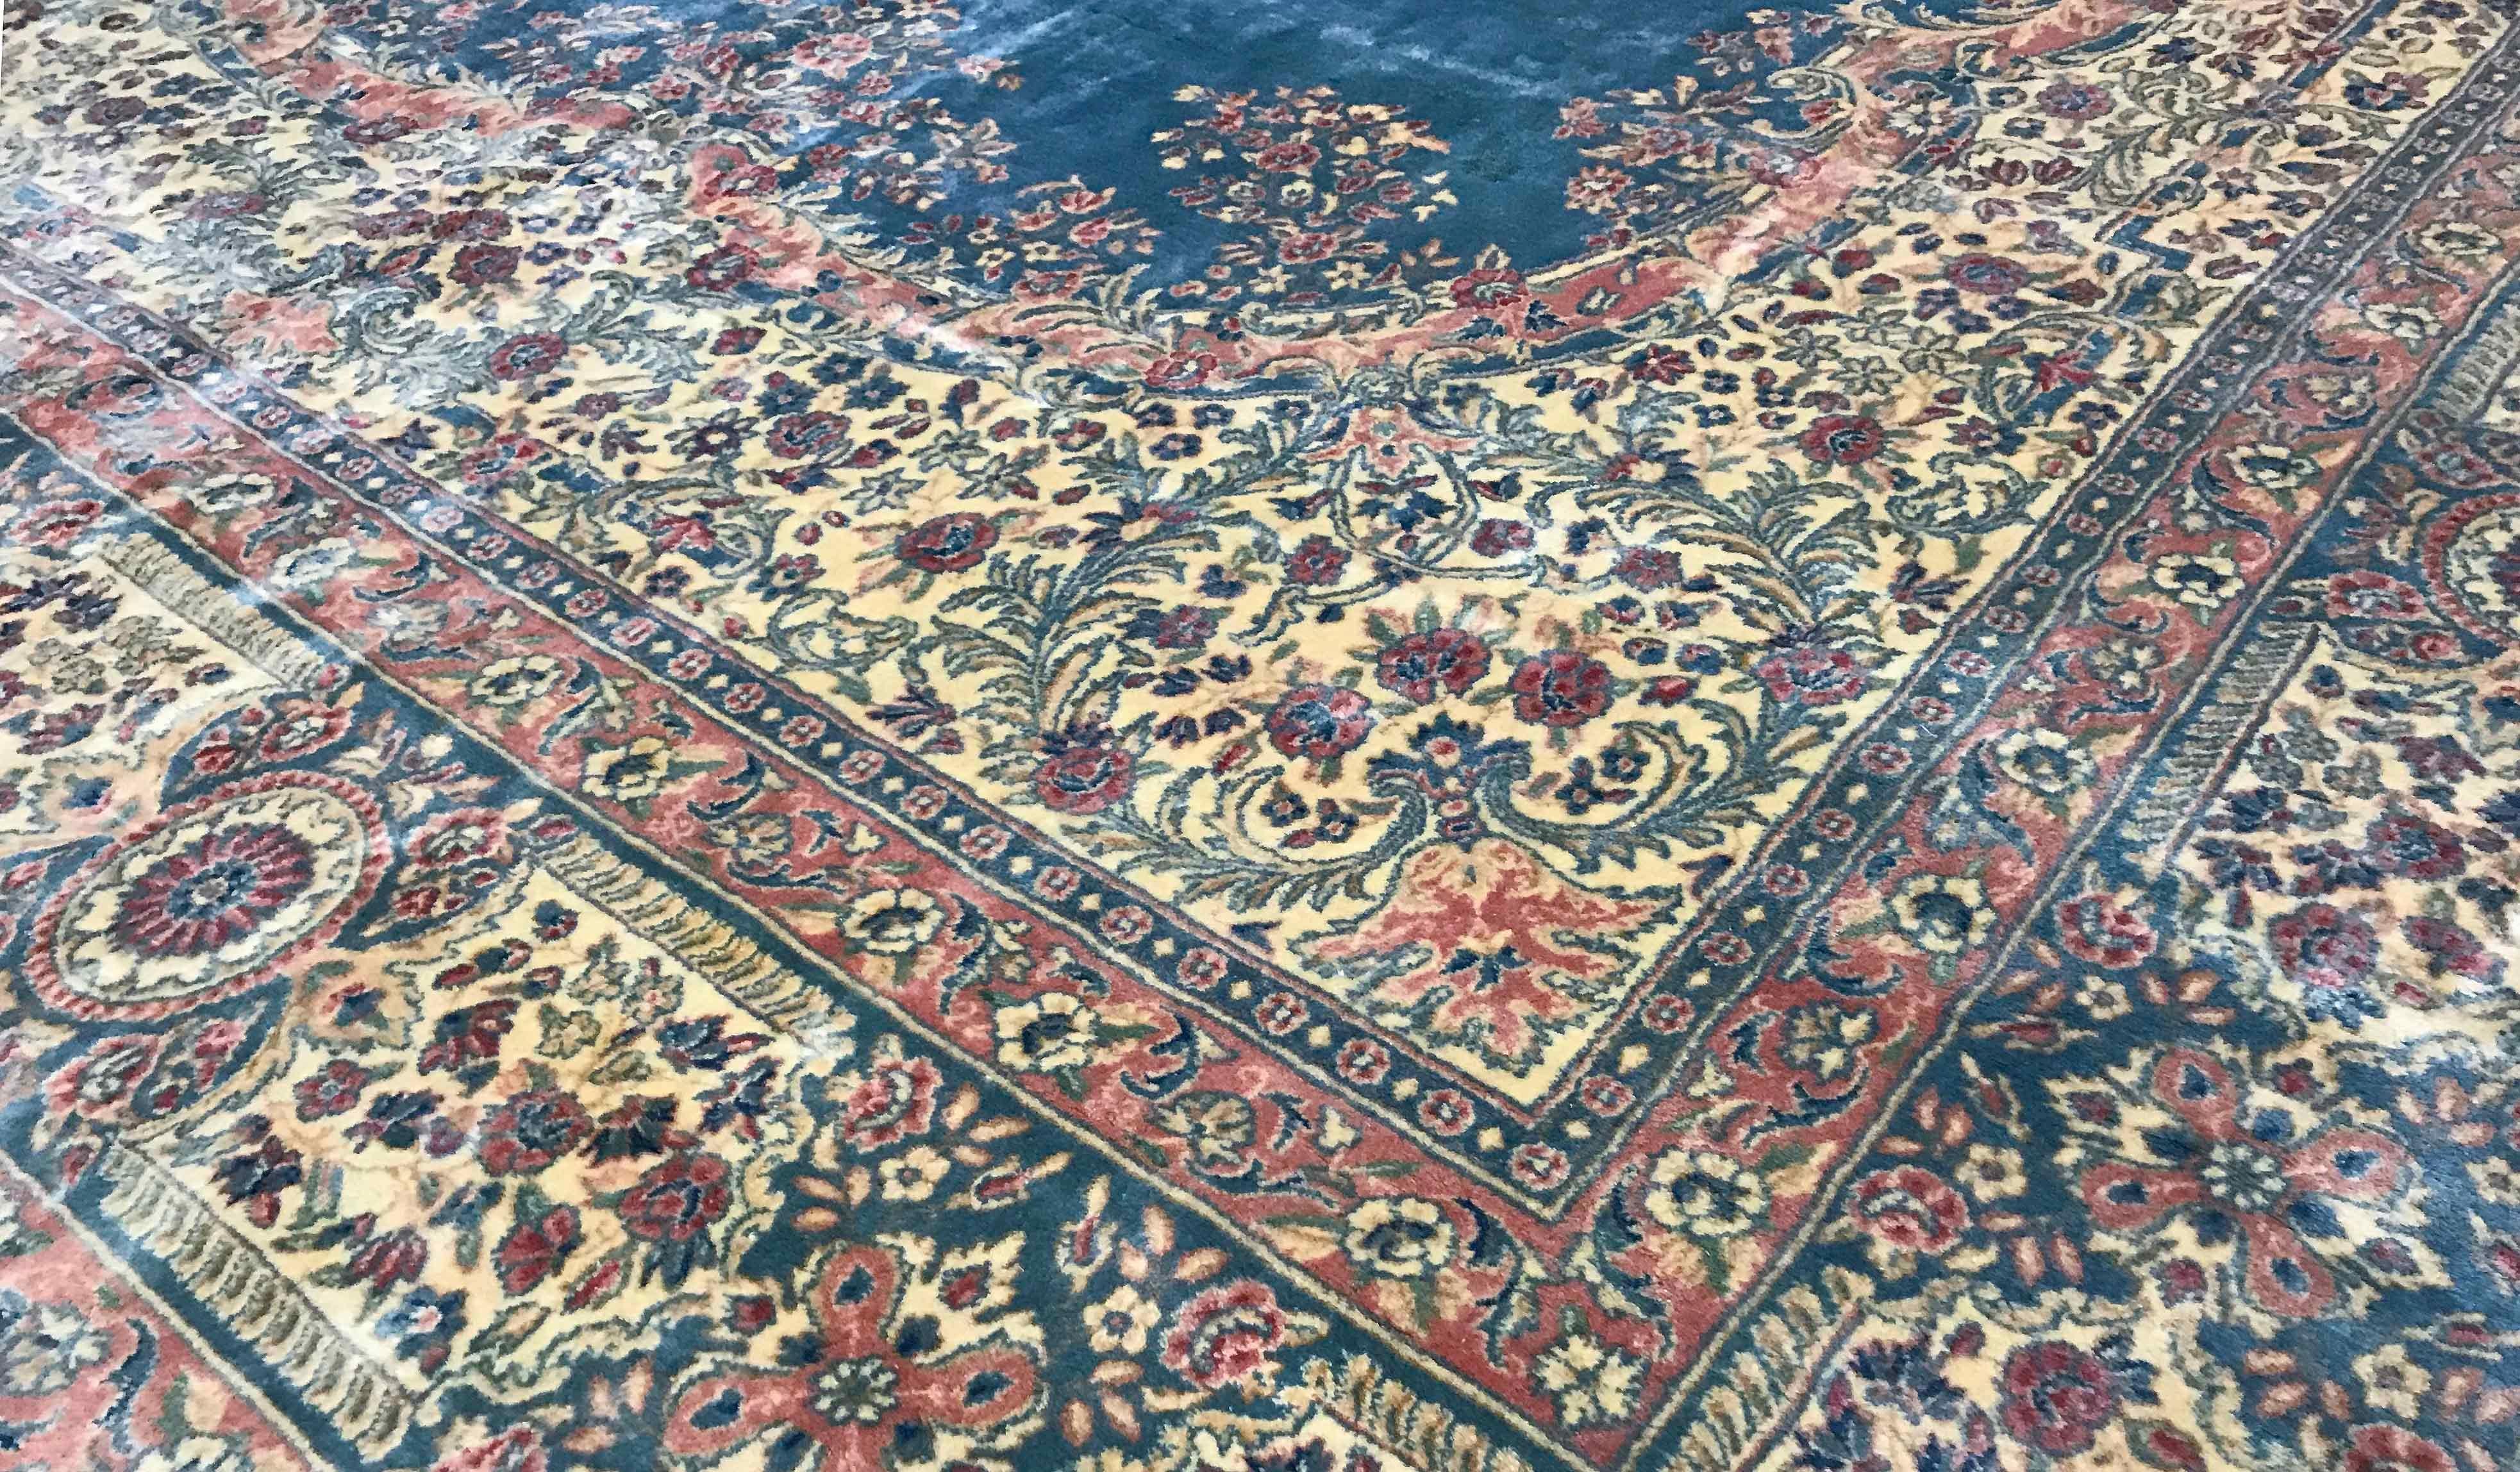 Vintage Persian Kerman rug, circa 1940. The soft blue field on which has been placed an elaborate medallion design and bounded by repeating floral patterns is then enclosed by a main border continuing the floral theme. The skill of the weavers in